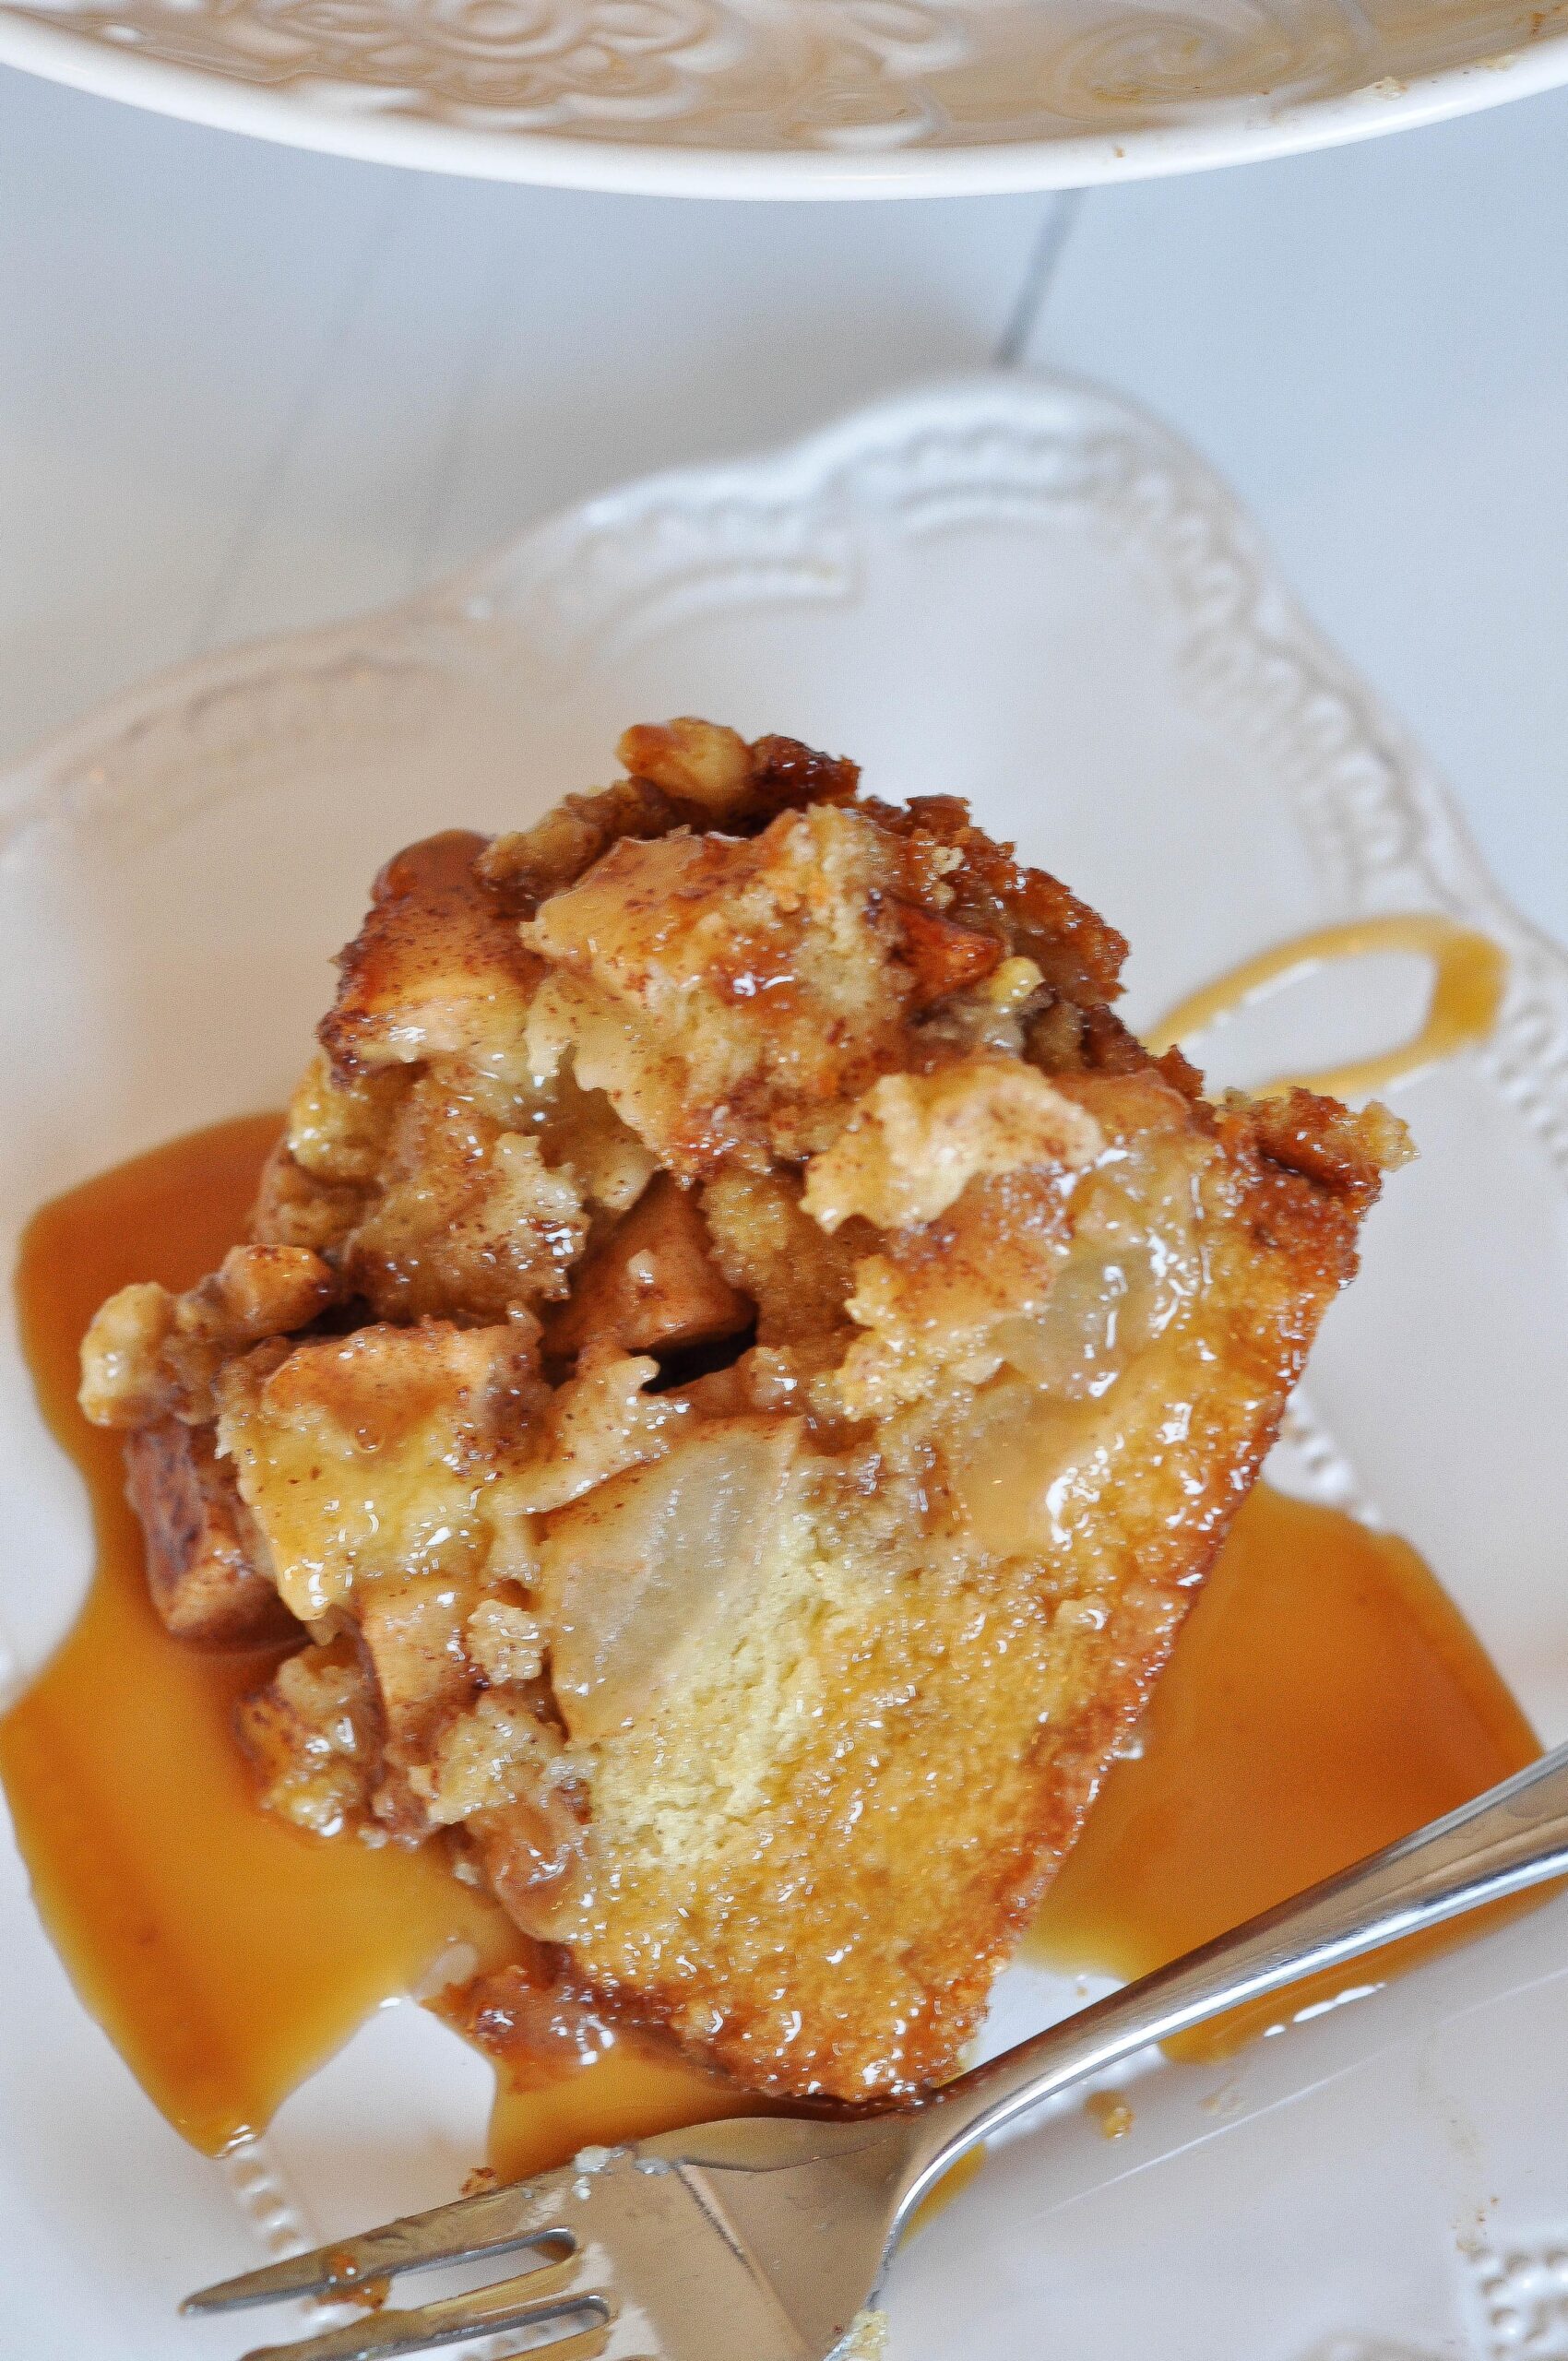  Get ready to fall in love with this delicious Irish Apple Cake with Toffee Sauce.